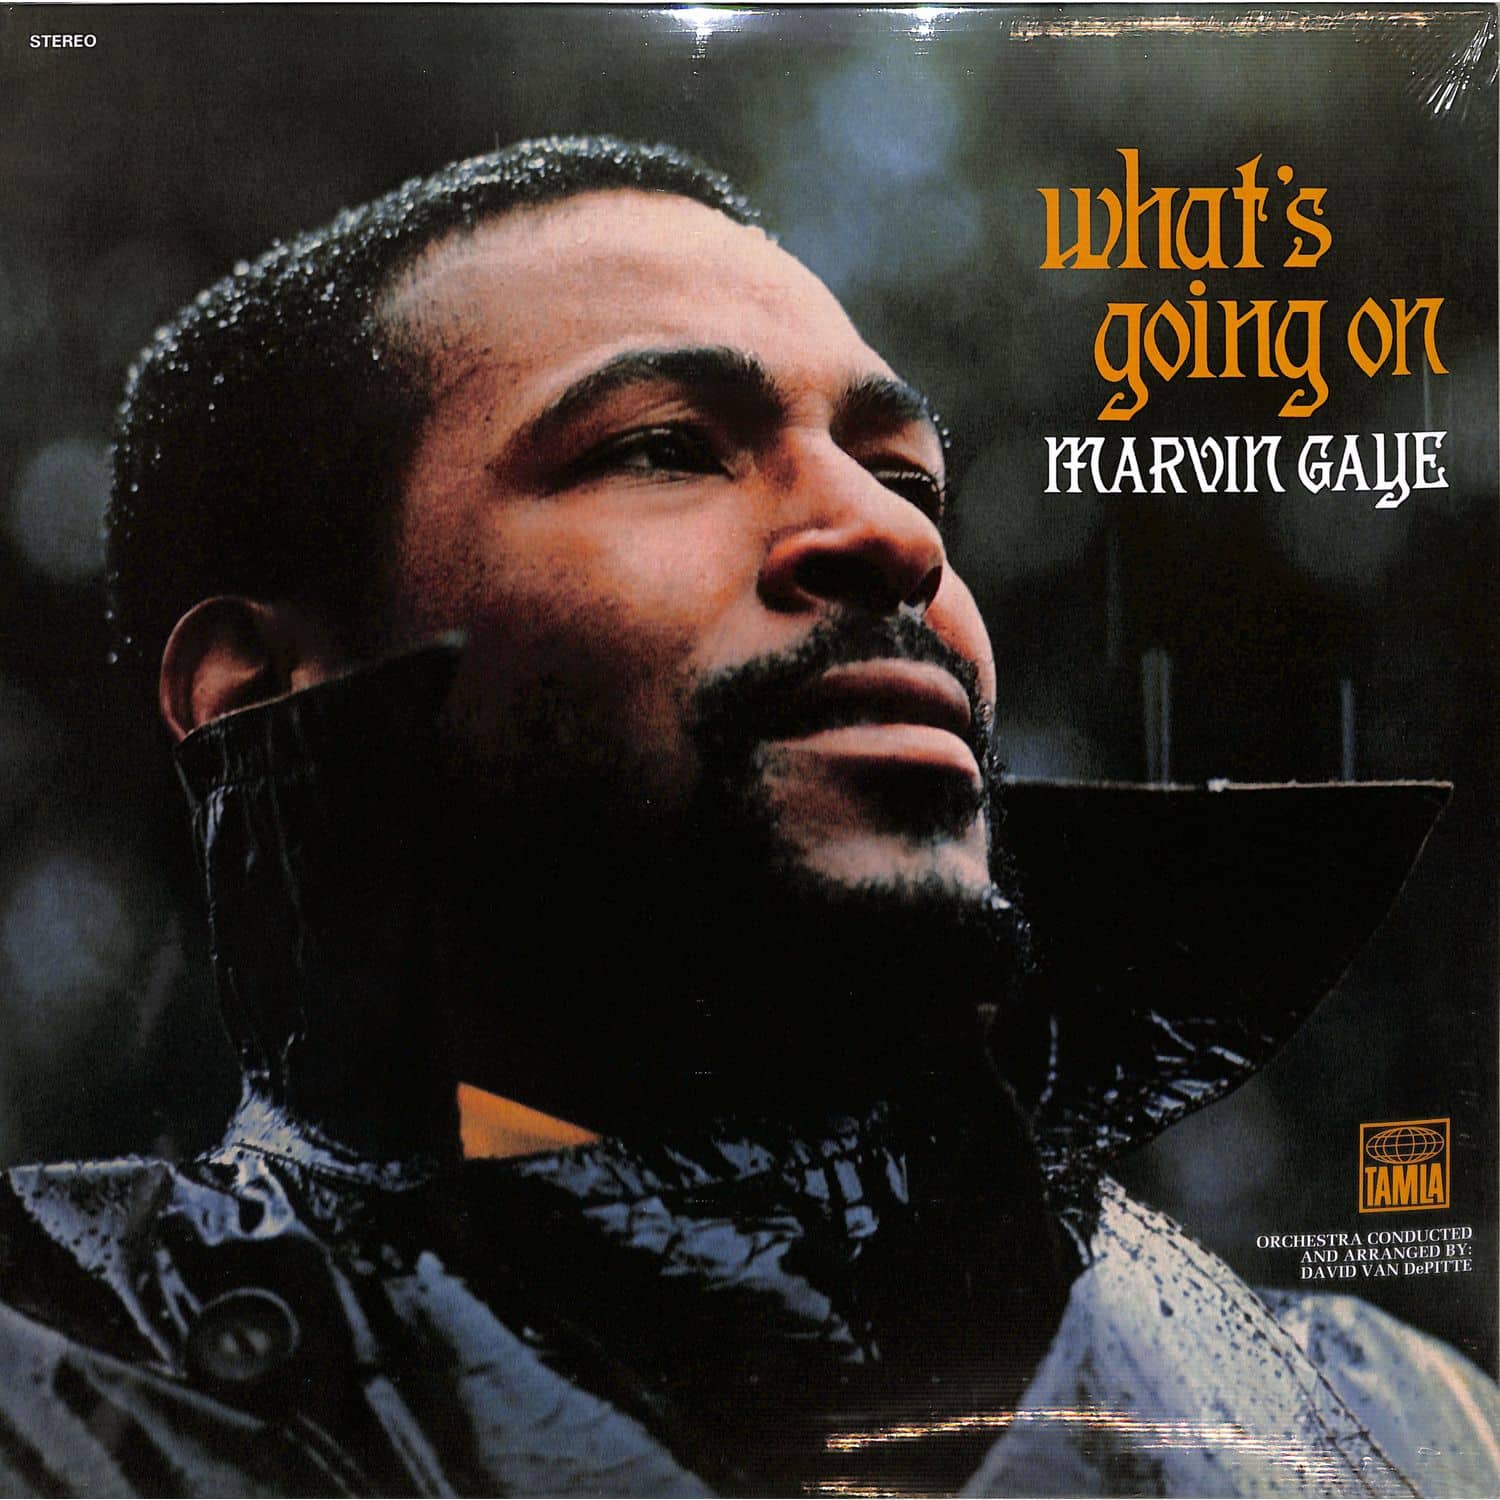 Marvin Gaye - WHATS GOING ON - 50TH ANNIVERSARY 